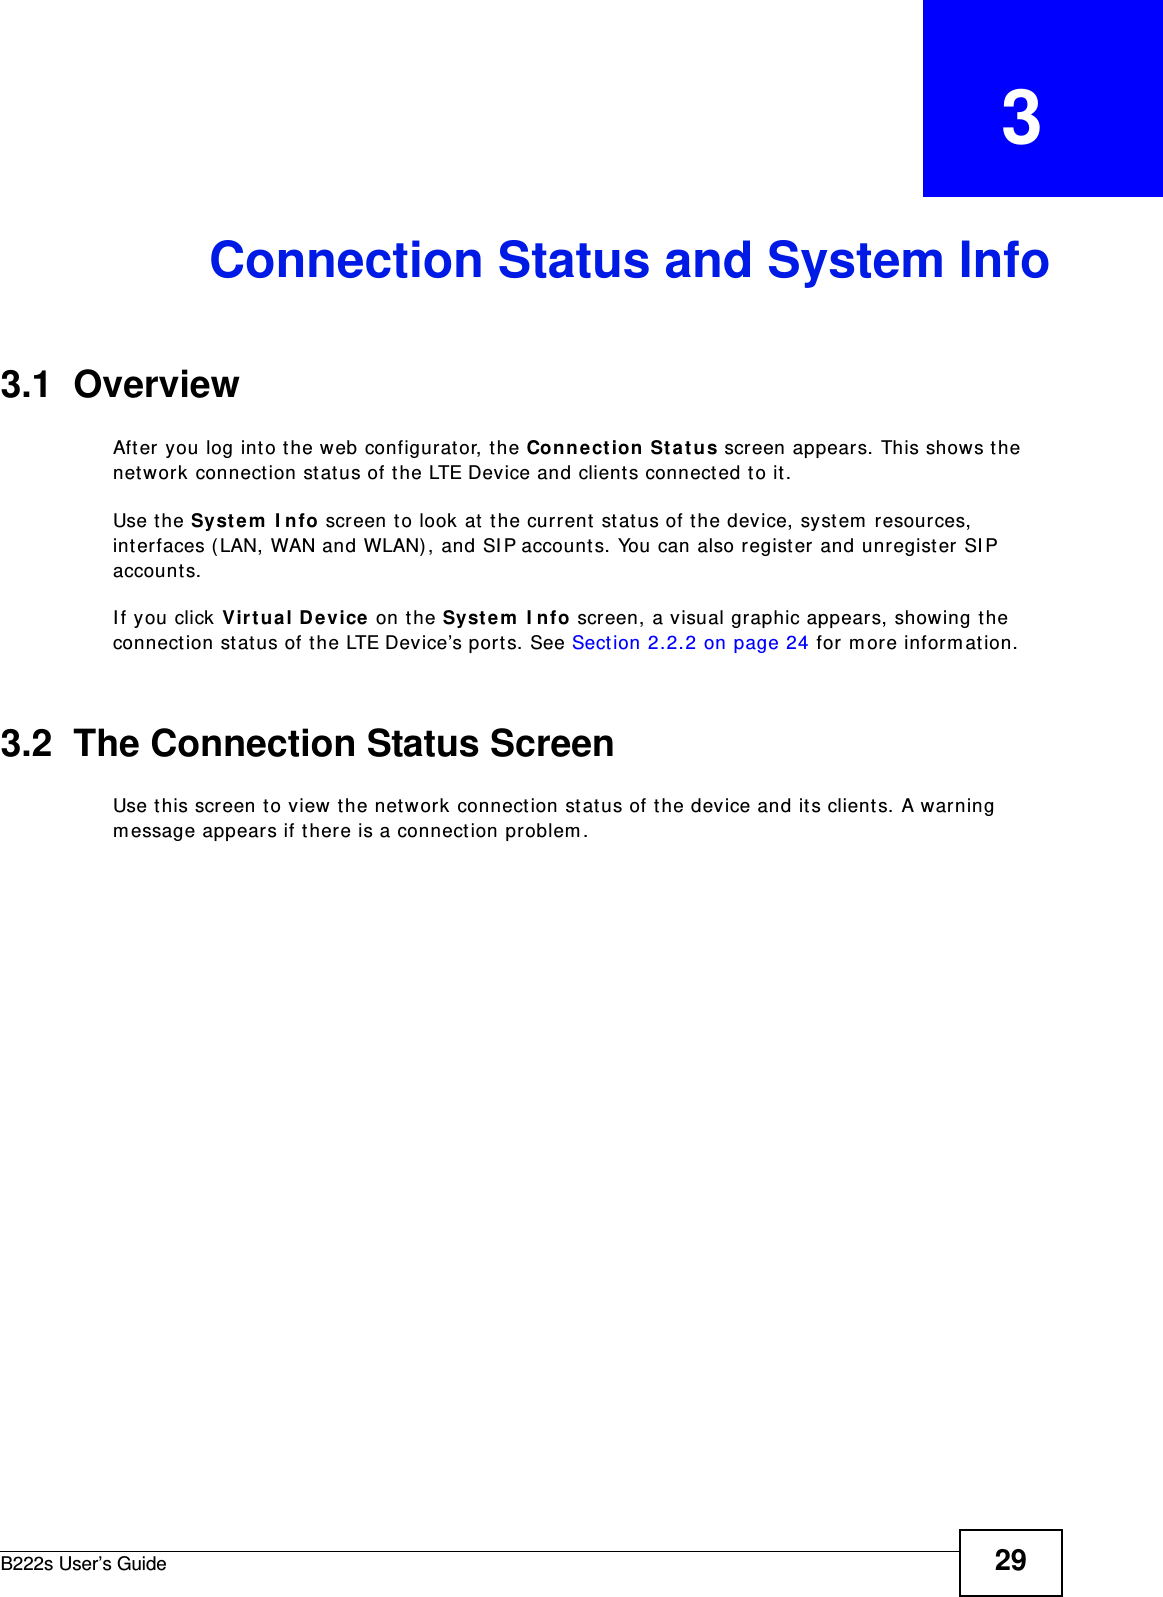 B222s User’s Guide 29CHAPTER   3Connection Status and System Info3.1  OverviewAft er you log int o t he web configurat or, t he Con nect ion St a tu s screen appear s. This shows the network connect ion st at us of the LTE Device and client s connected t o it.Use t he Syst em  I nfo screen to look at  t he current  status of t he device, system  resour ces, int erfaces (LAN, WAN and WLAN) , and SI P account s. You can also regist er and unregist er  SI P account s. I f you click Vir t ual D e v ice on t he Syst e m  I nfo screen, a visual graphic appears, showing the connect ion st at us of t he LTE Device’s por t s. See Sect ion 2.2.2 on page 24 for m ore inform ation.3.2  The Connection Status ScreenUse t his screen to view t he net work connect ion st at us of t he device and it s clients. A warning m essage appears if t here is a connect ion pr oblem . 